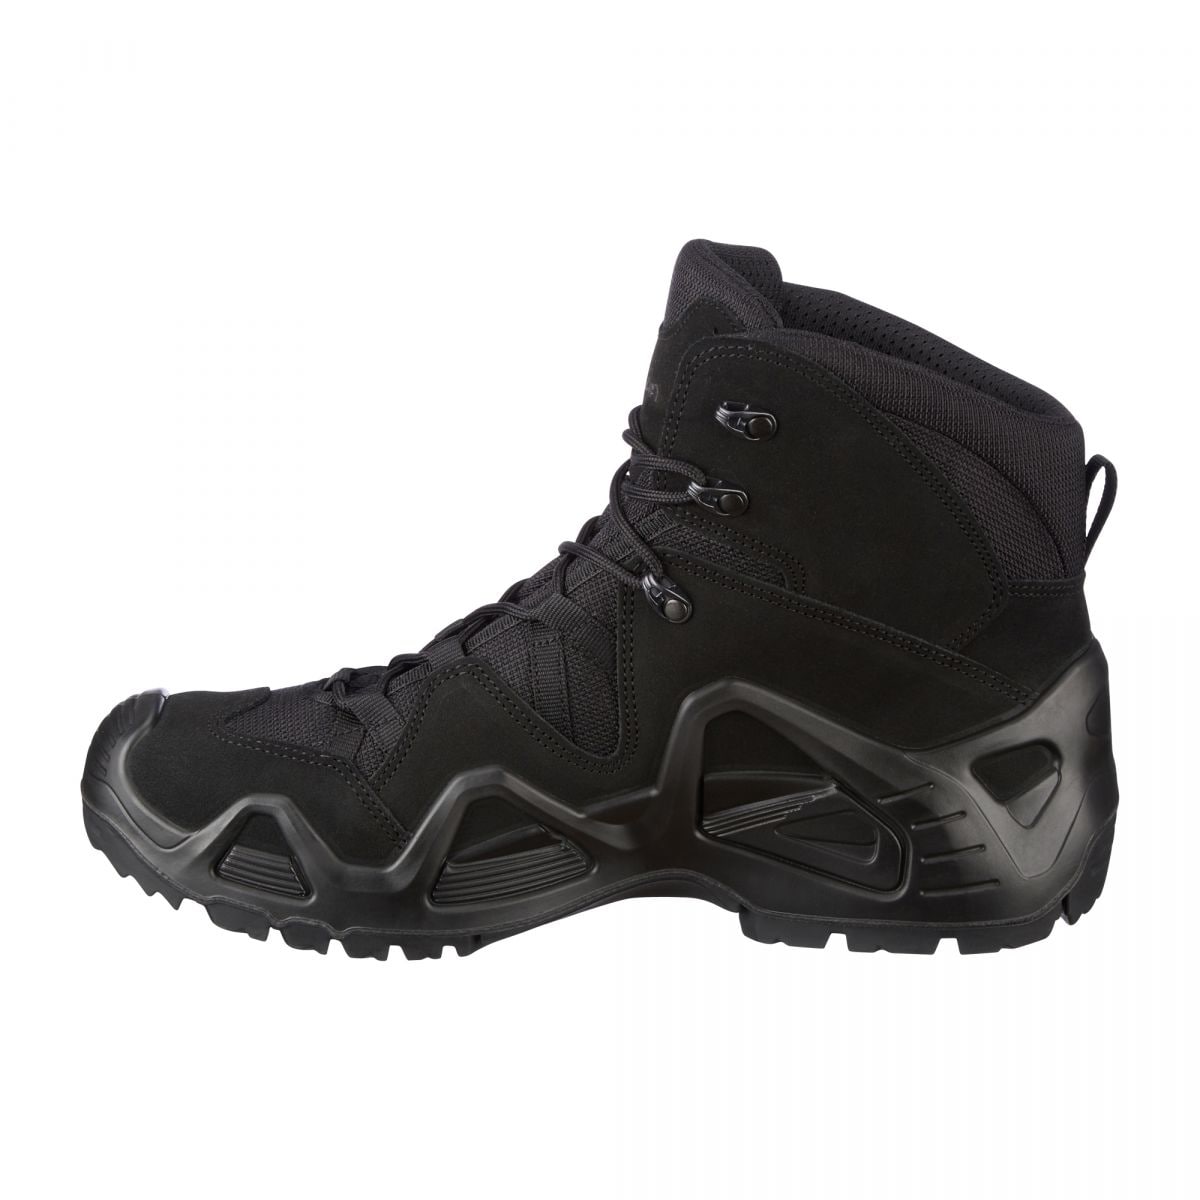 Purchase the LOWA Boots Zephyr GTX Mid TF black by ASMC